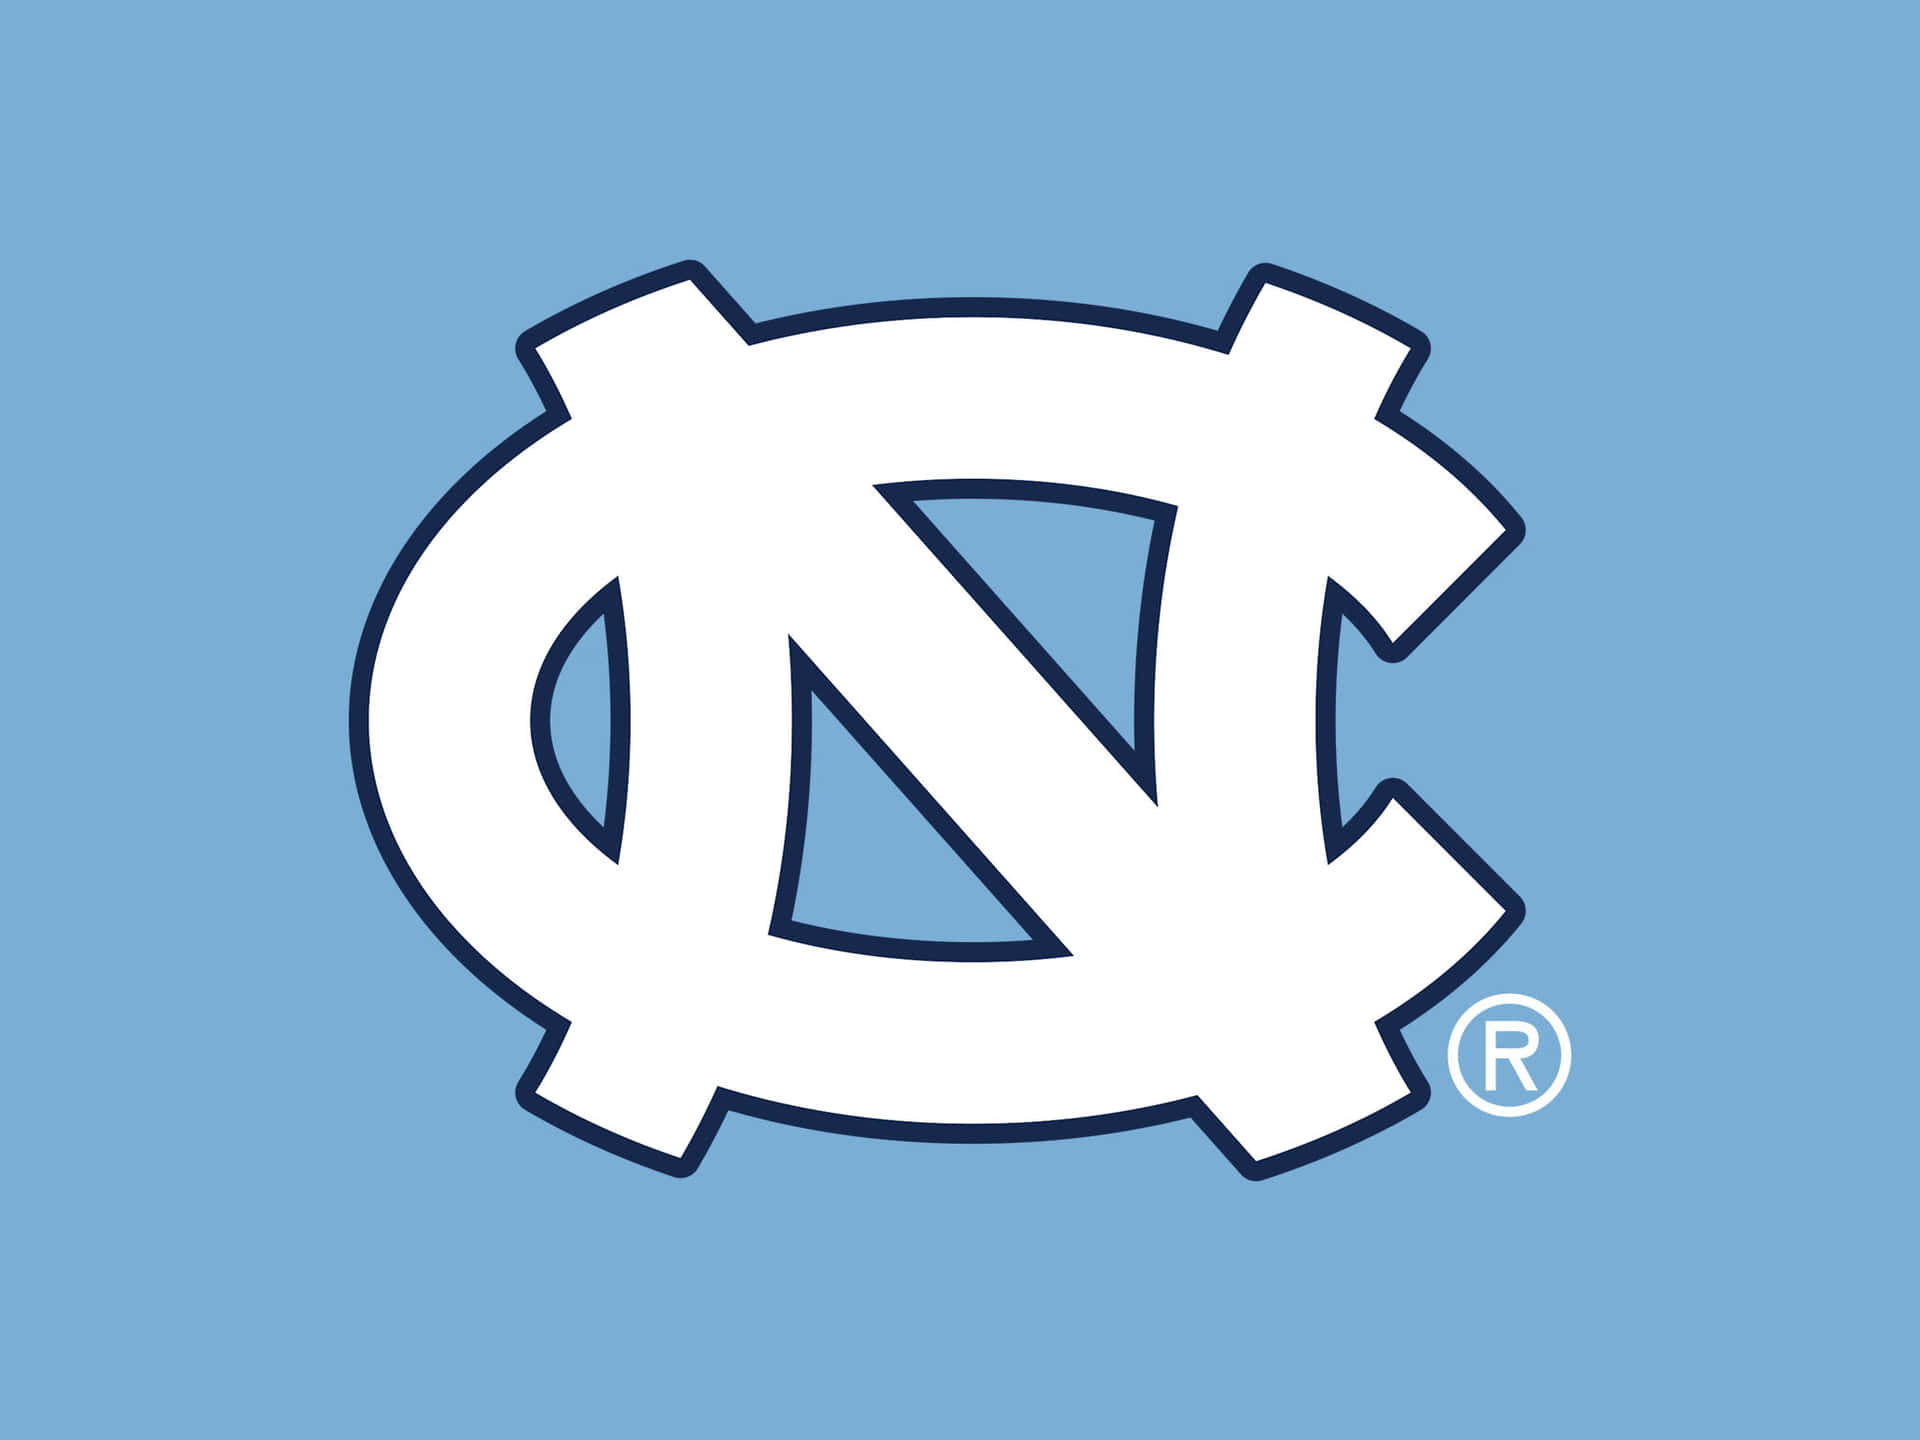 Show Your Support For The Tar Heels! Background